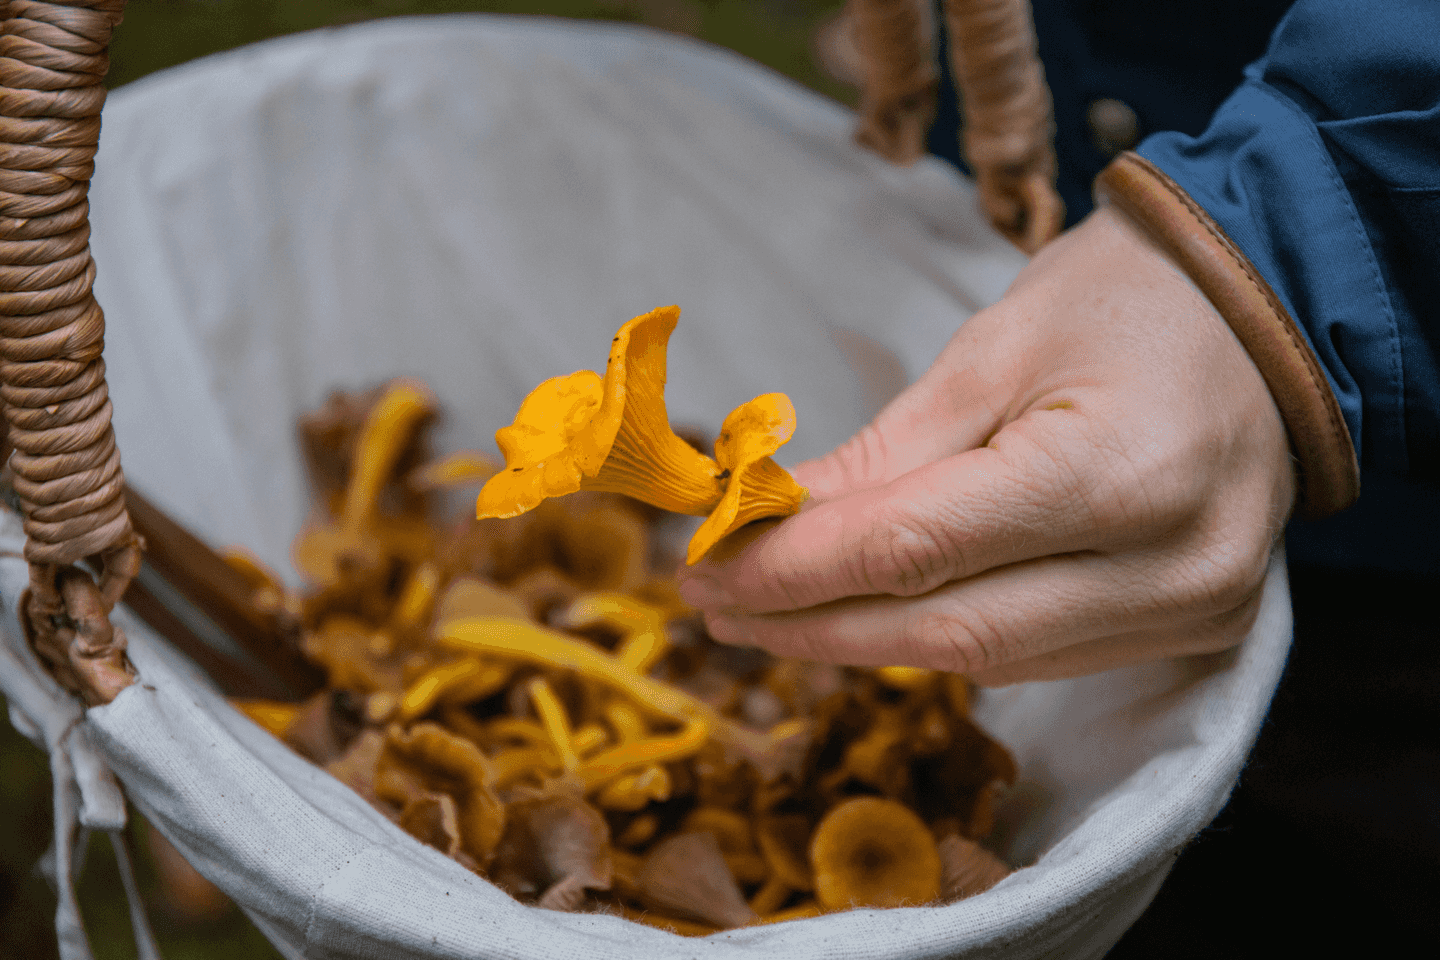 A hand holding a chanterelle in a basket